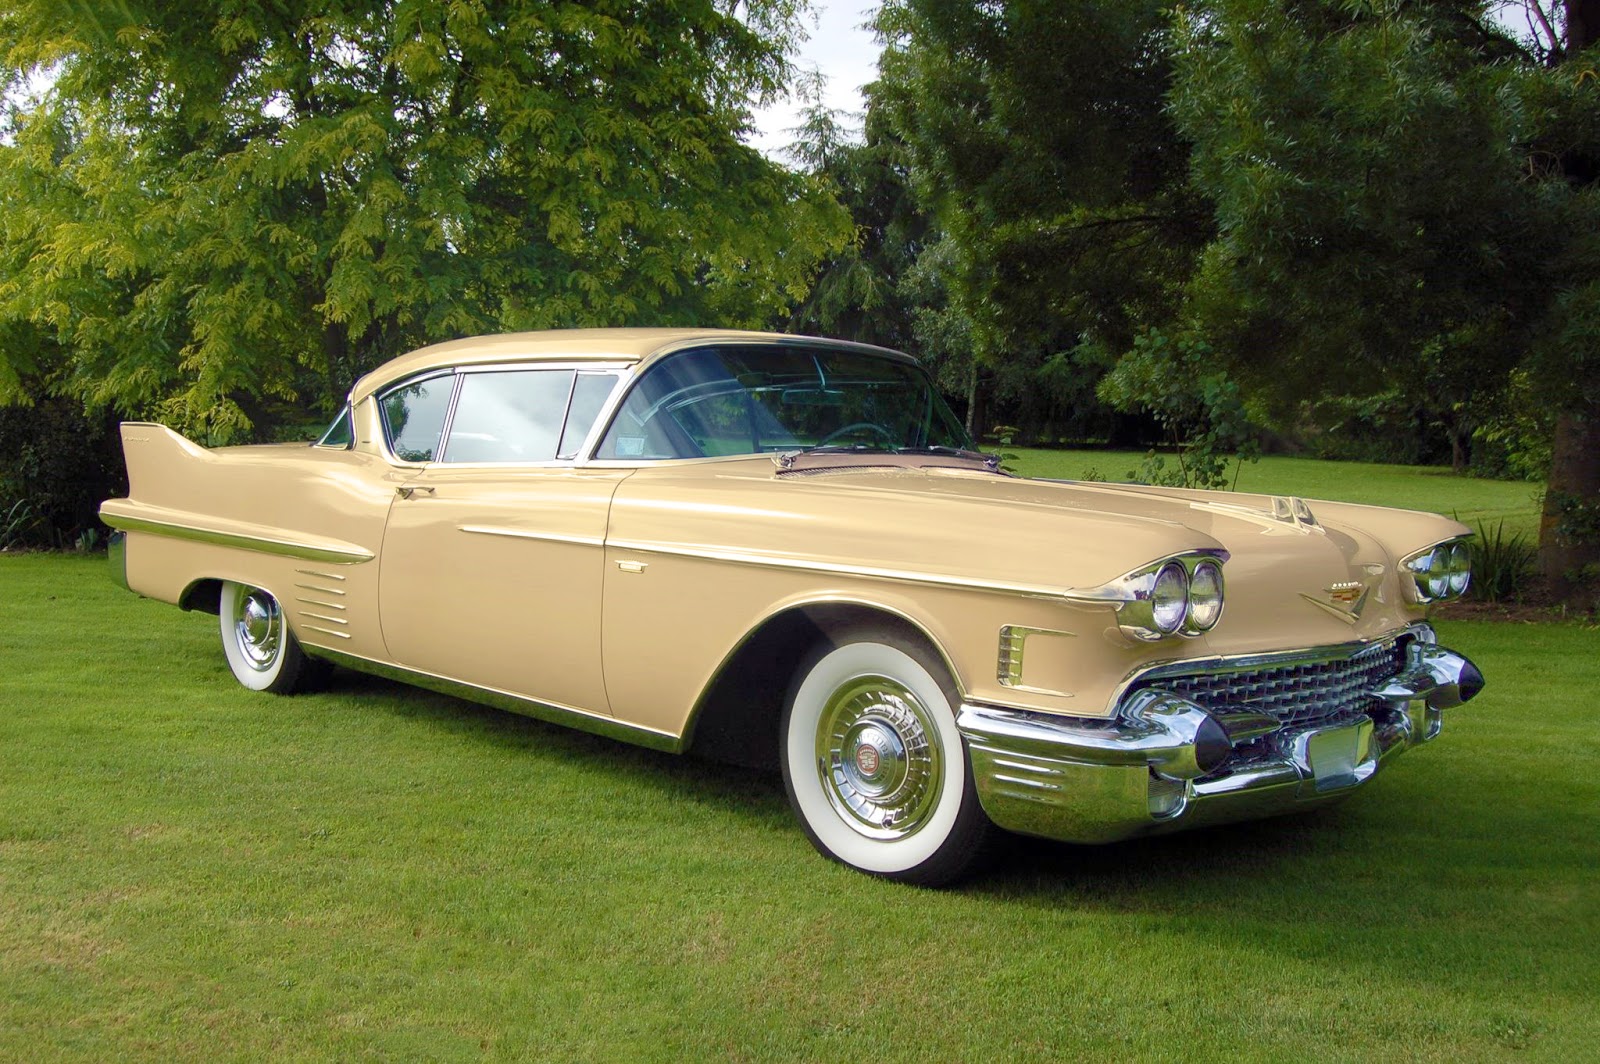 transpress nz: 1958 Cadillac Coupe deVille